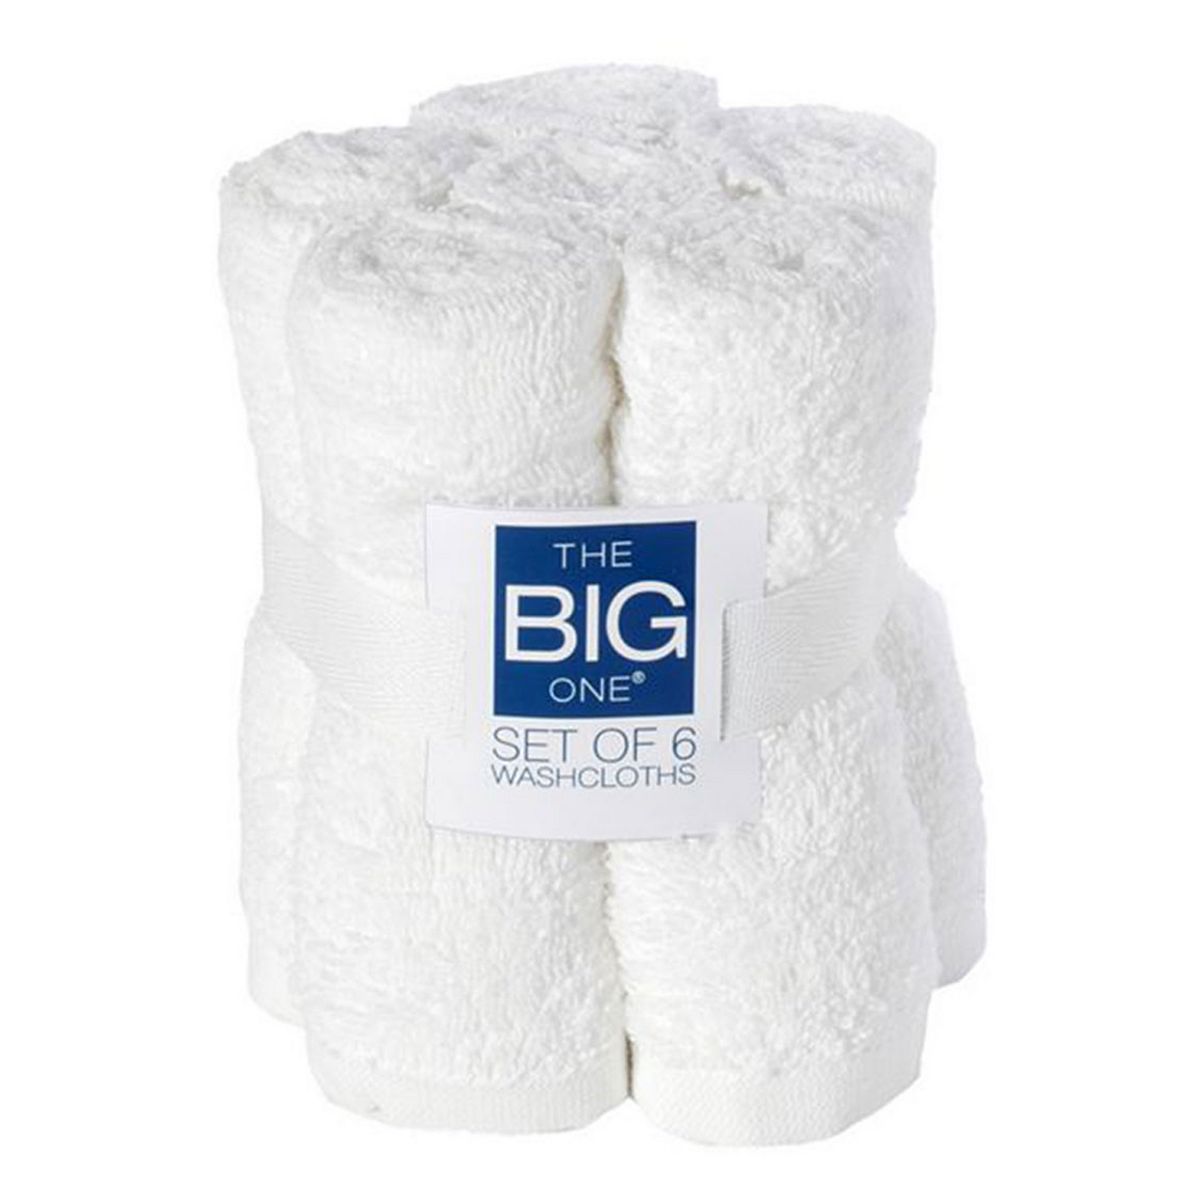 The Big One® Solid 6-pack Washcloths $3.99